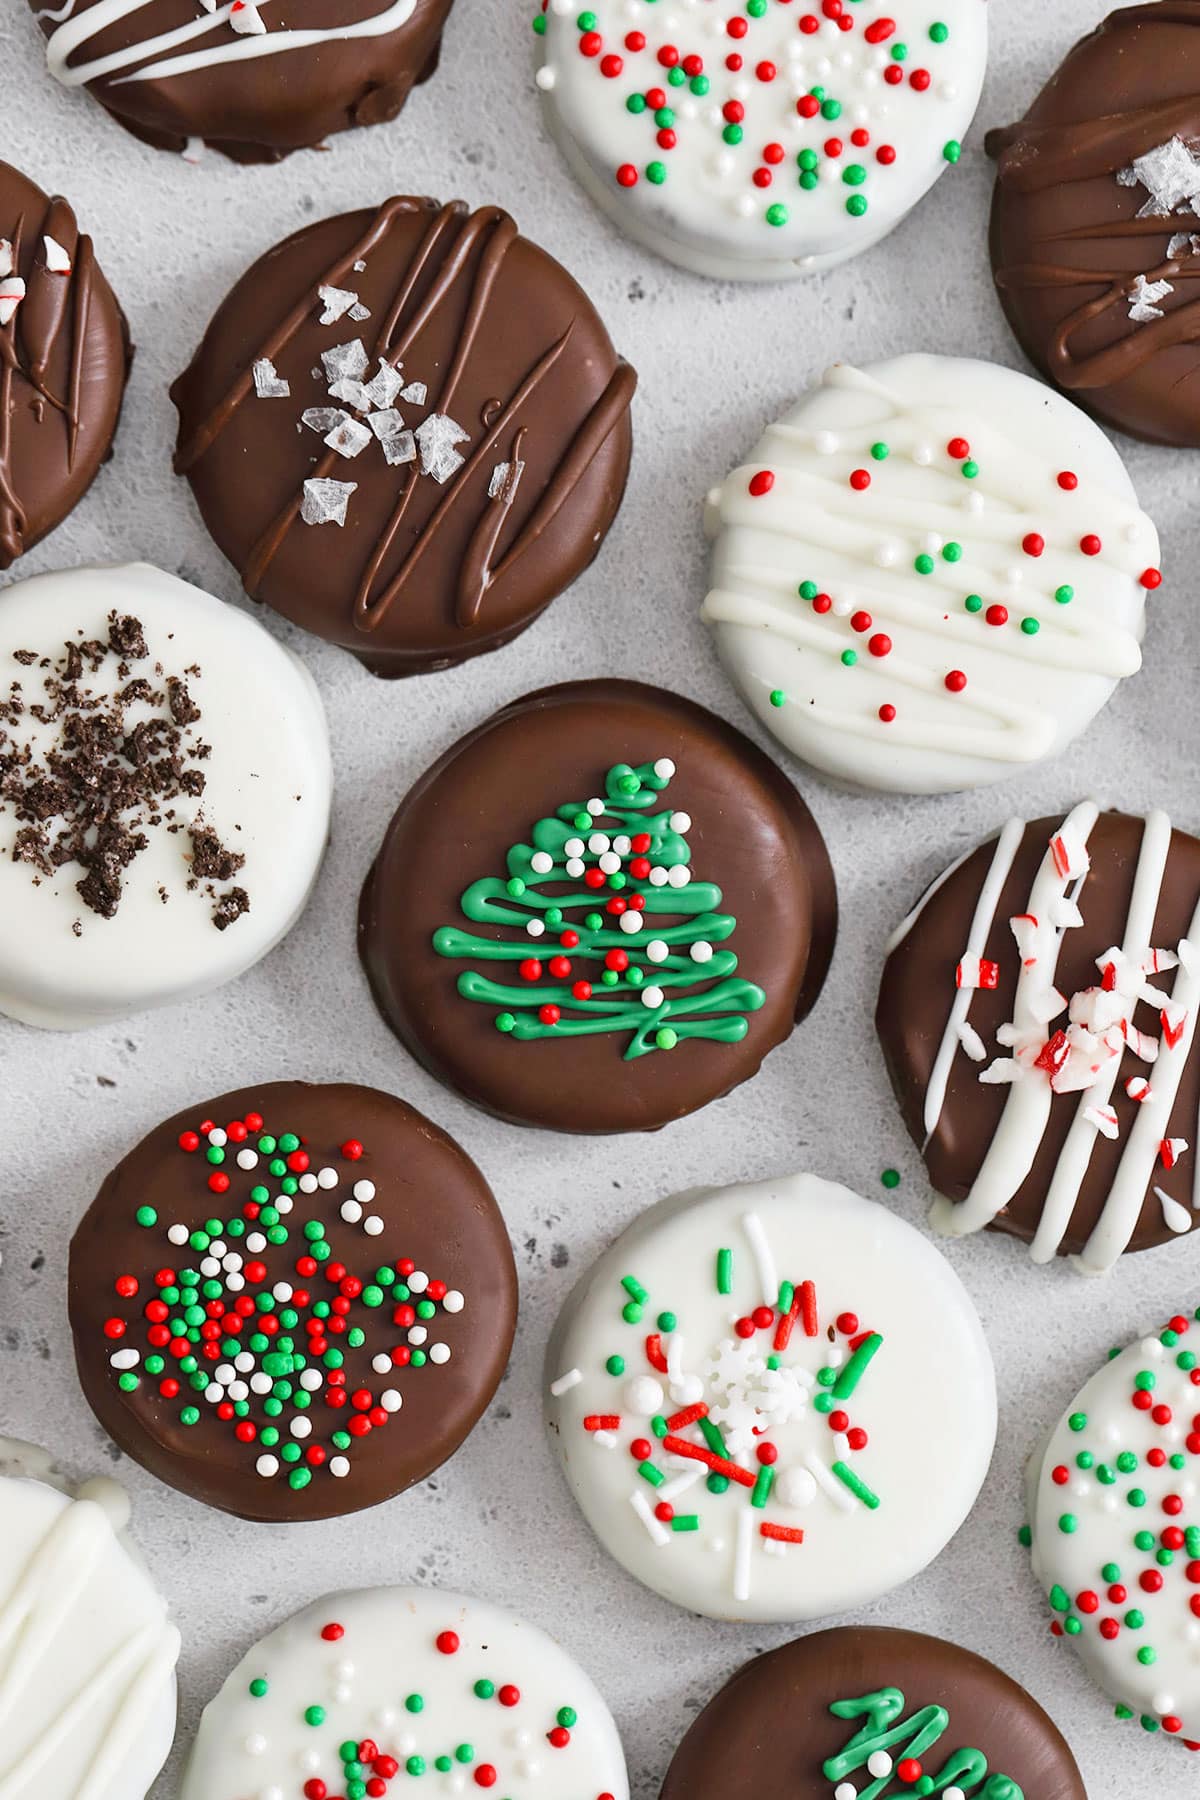 gluten-free Christmas chocolate covered oreos with holiday decorations